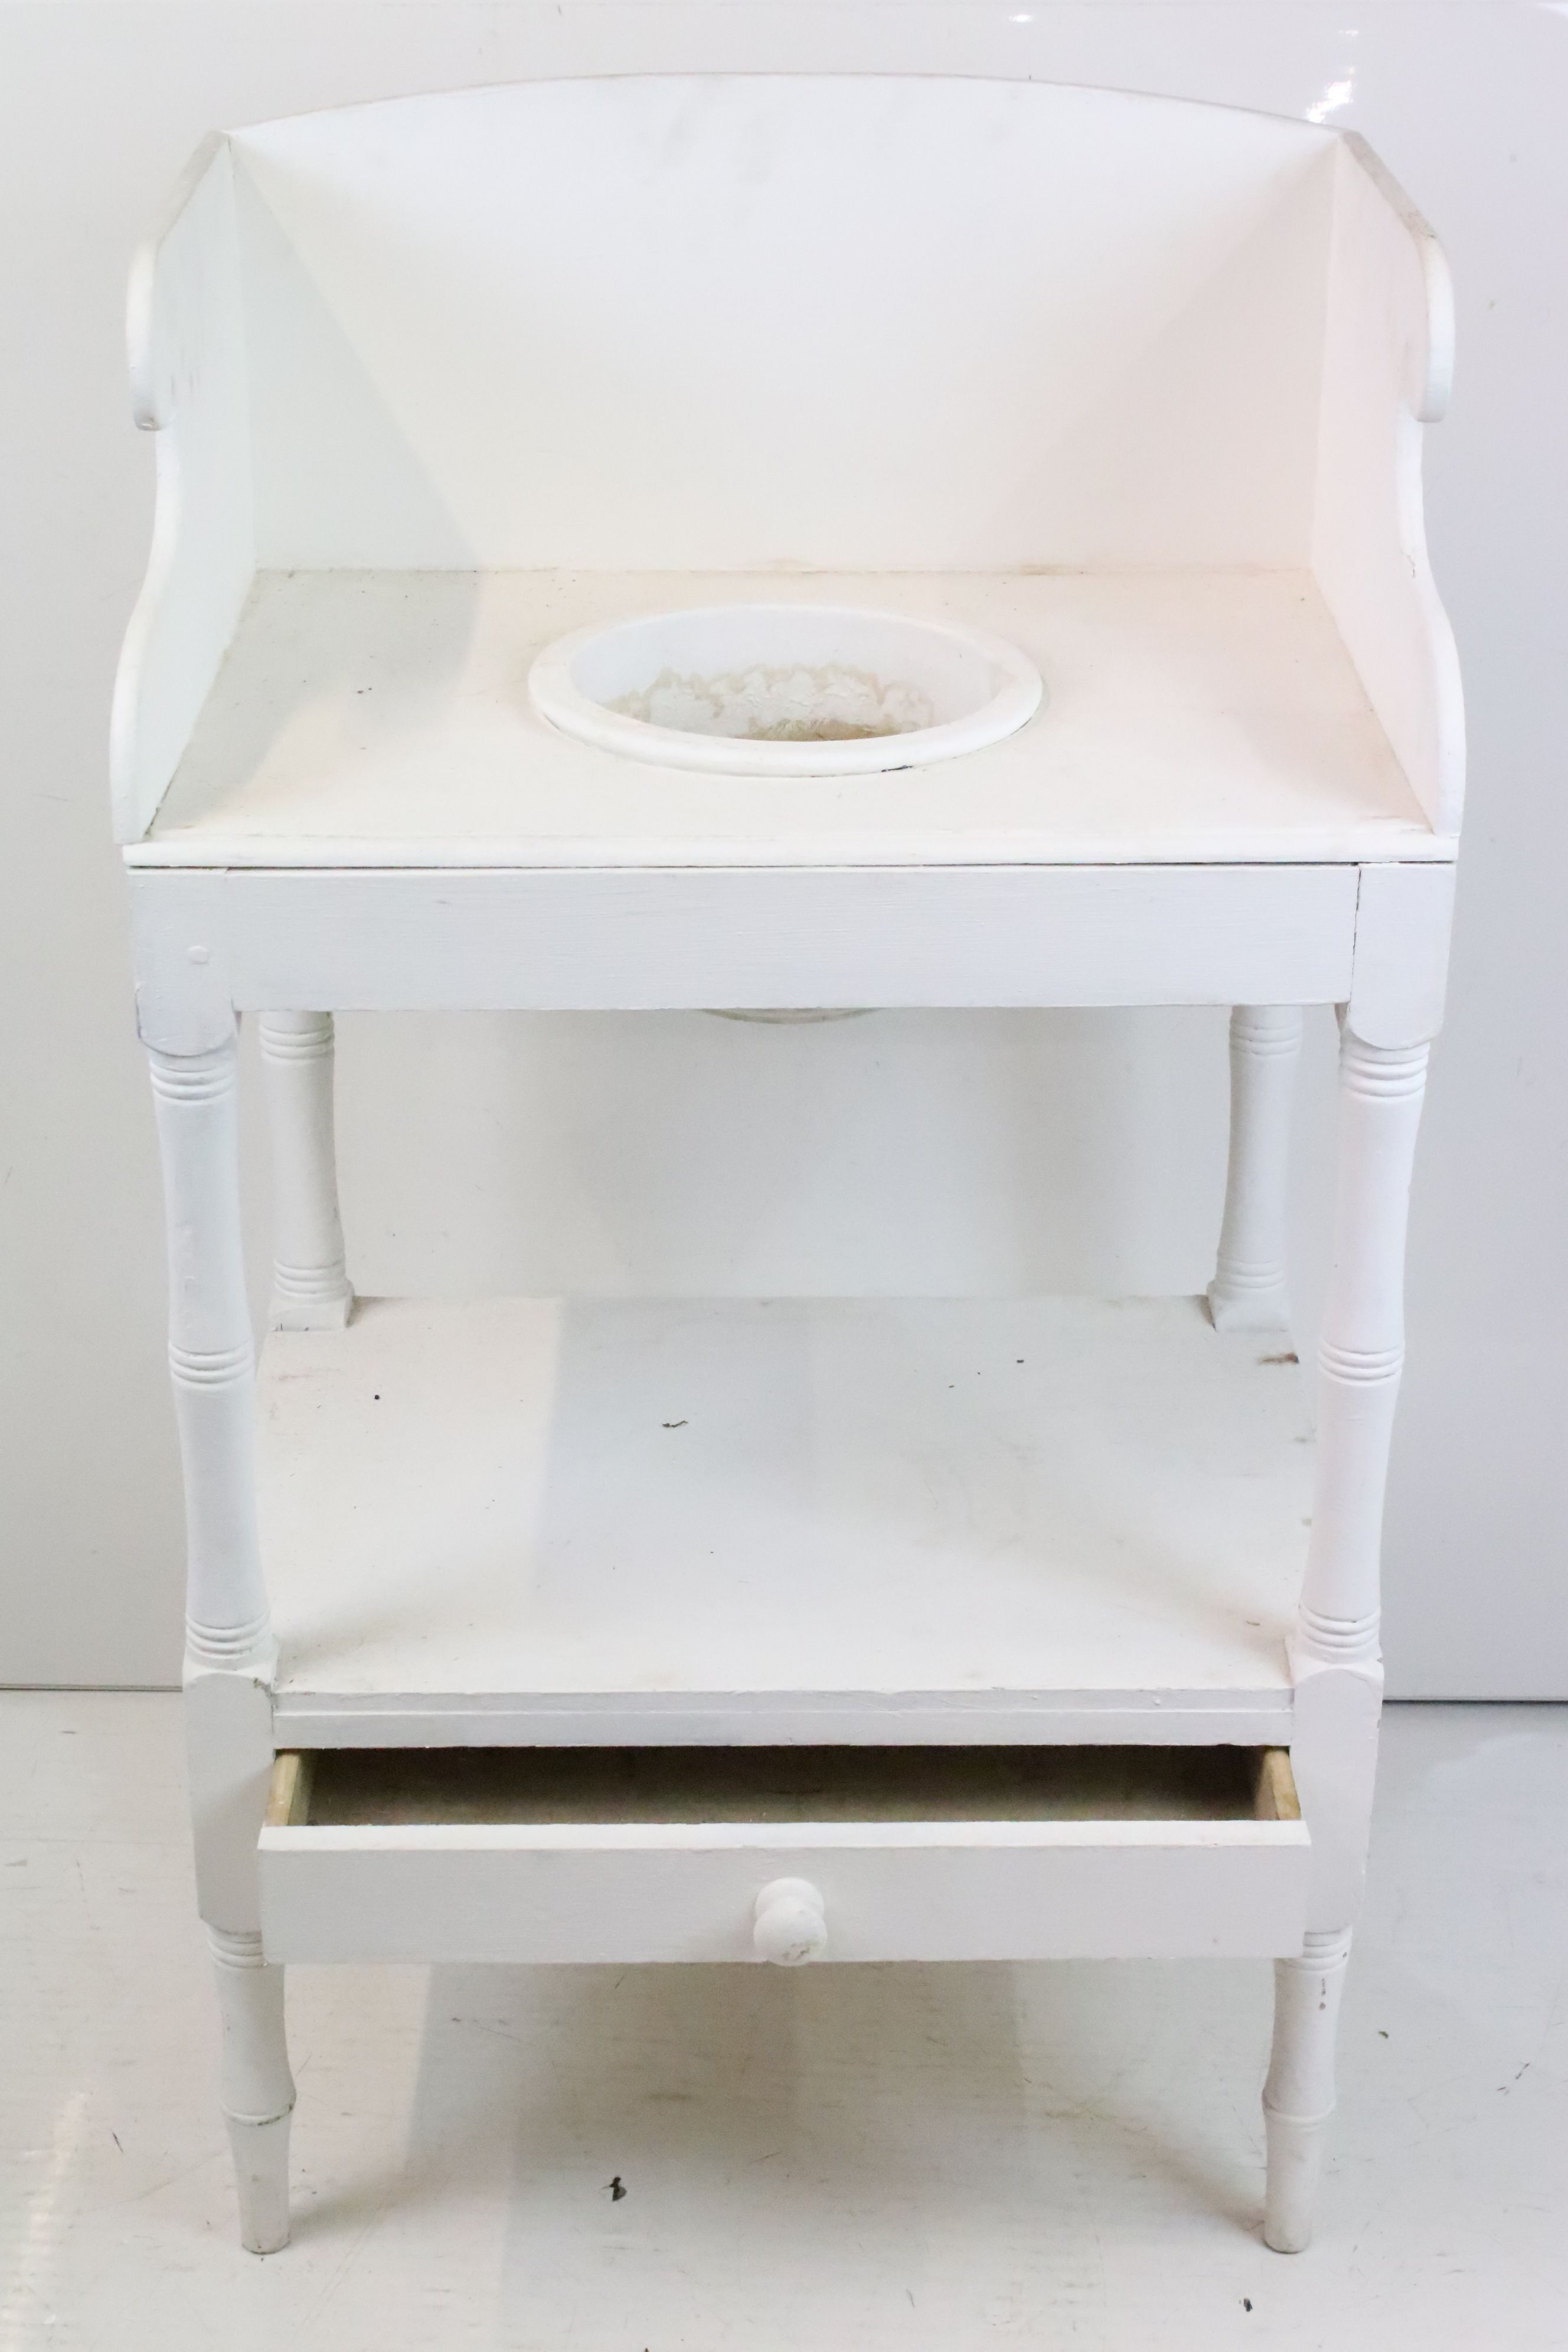 19th century style White Painted Washstand with recess with washbowl and shelf with drawer below, - Image 2 of 6